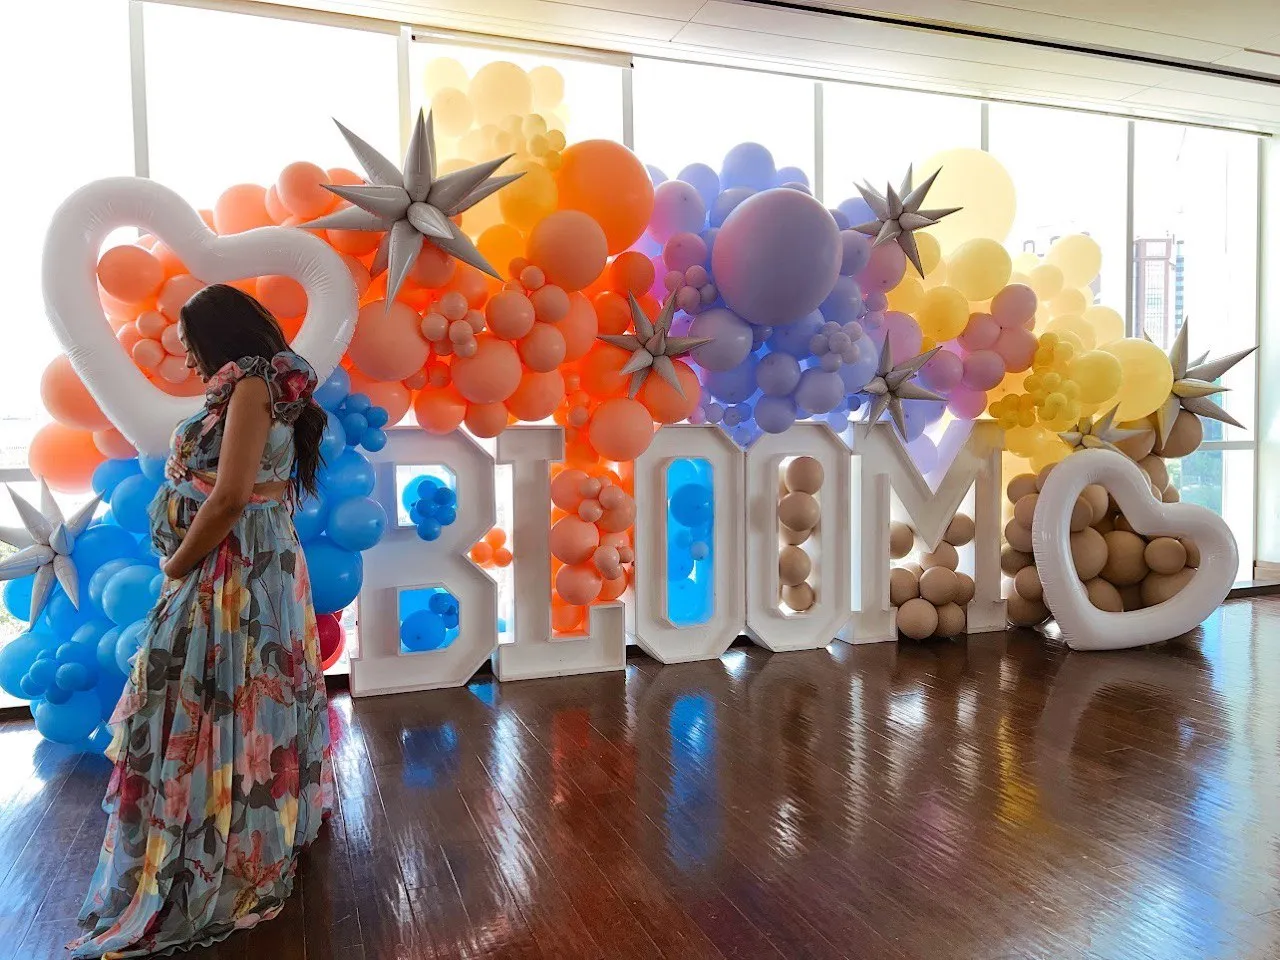 Balloons and letters